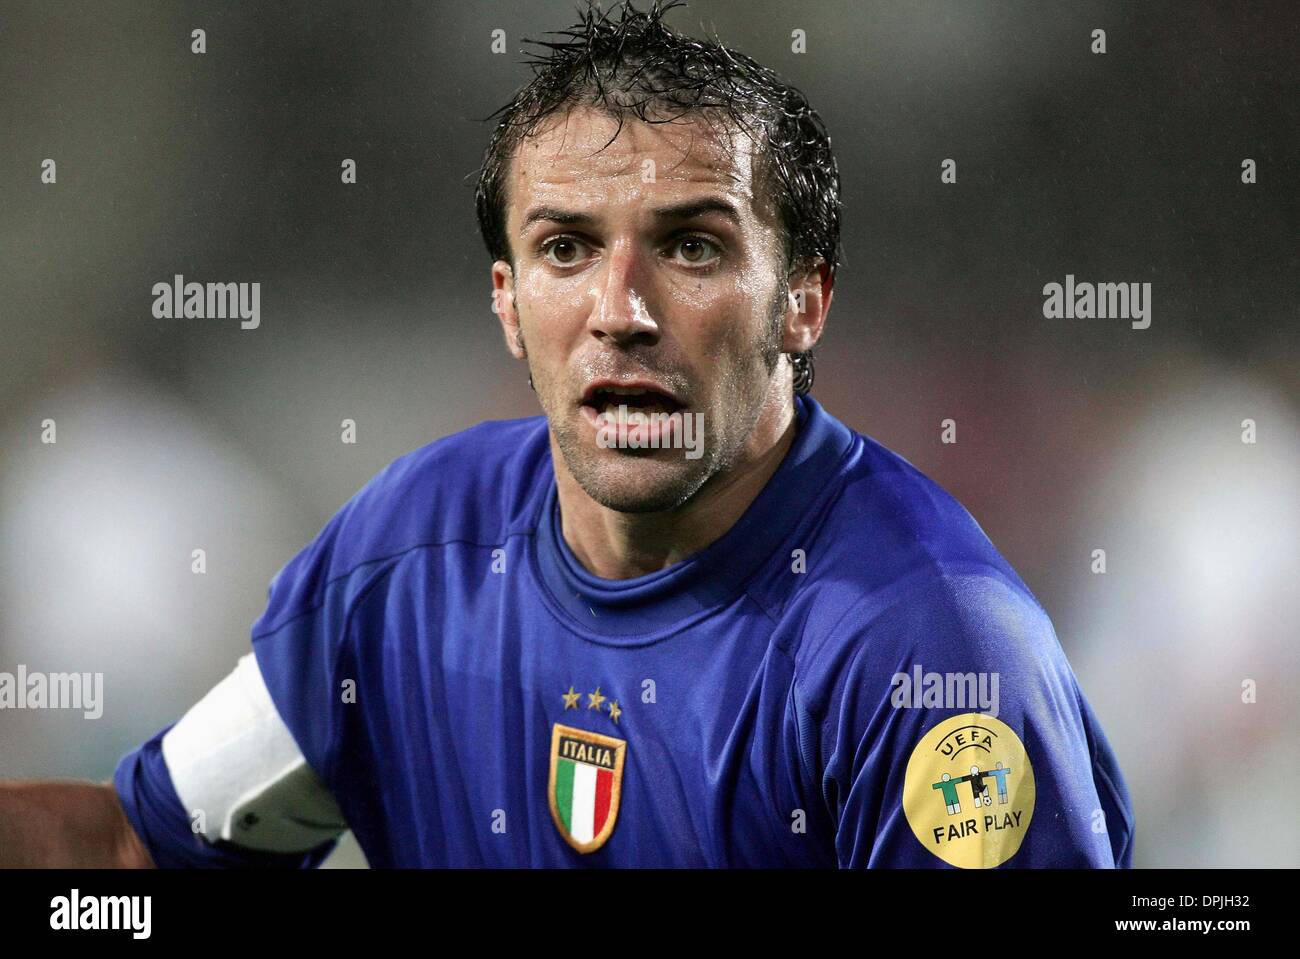 ALESSANDRO DEL PIERO.ITALY & JUVENTUS.ITALY V BULGARIA EURO 2004.D. AFONSO HENRIQUES STADIUM, GUIMARAES, PORTUGAL.22/06/2004.DIG24970.K47872.WORLD CUP PREVIEW 2006 Stock Photo